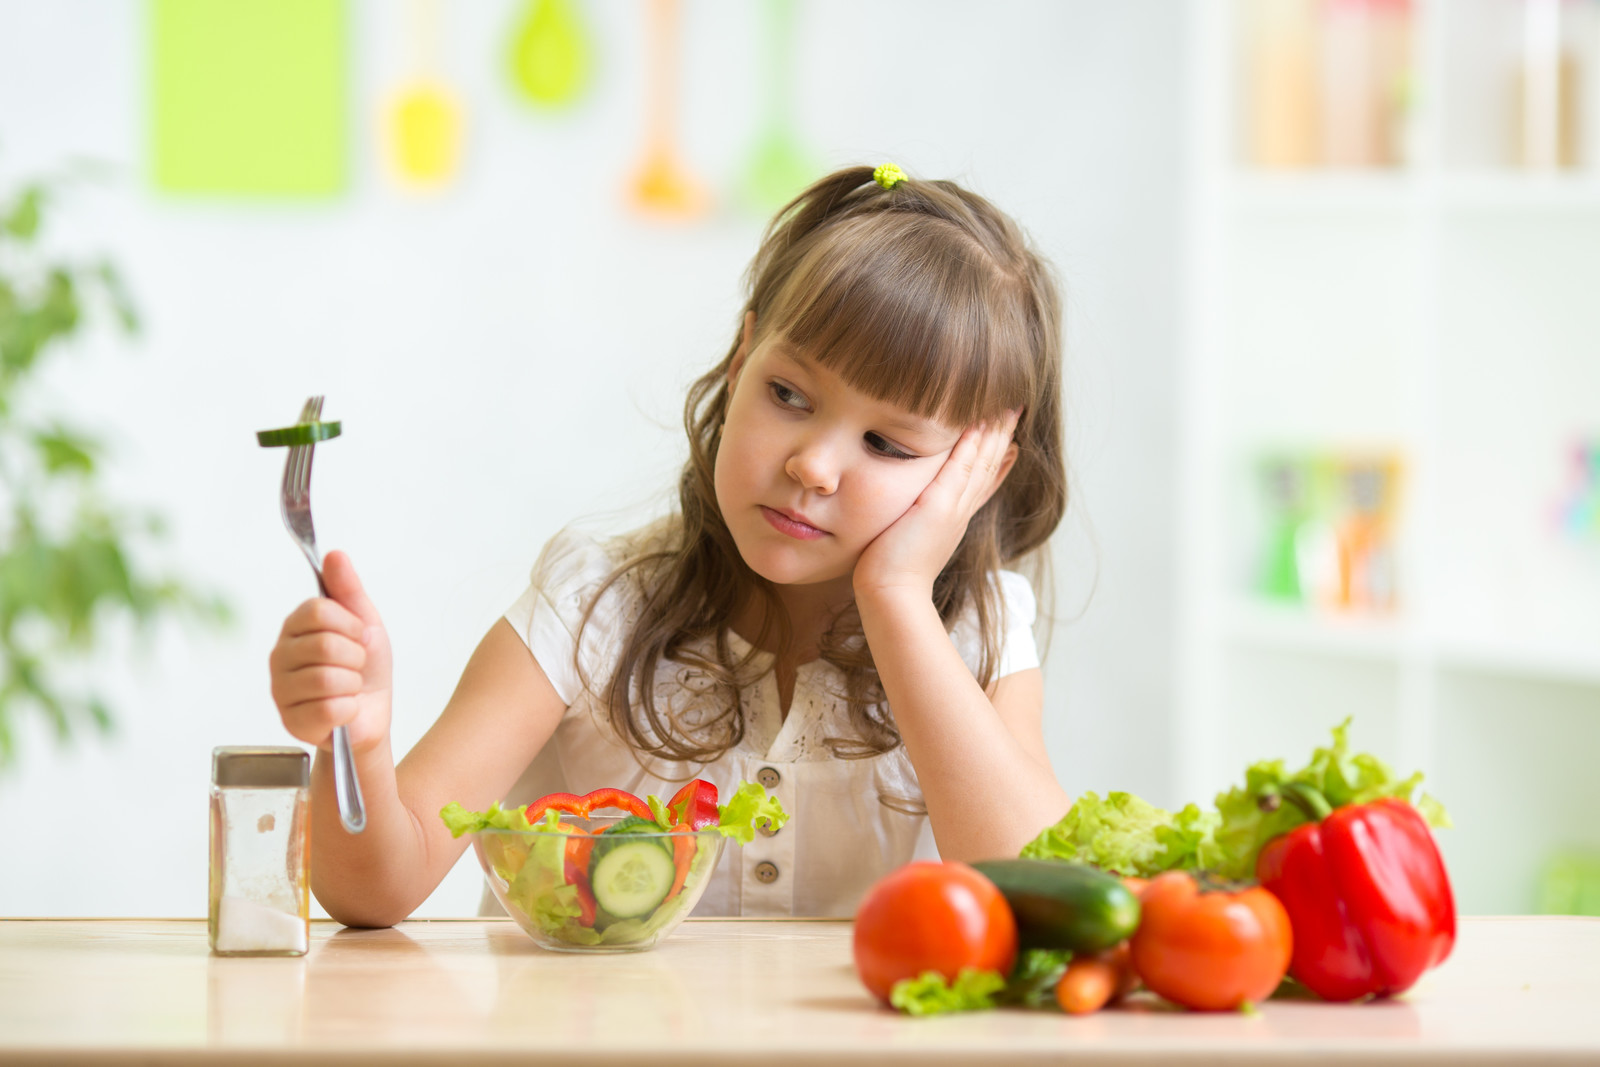 5 Tips for Mealtime Success